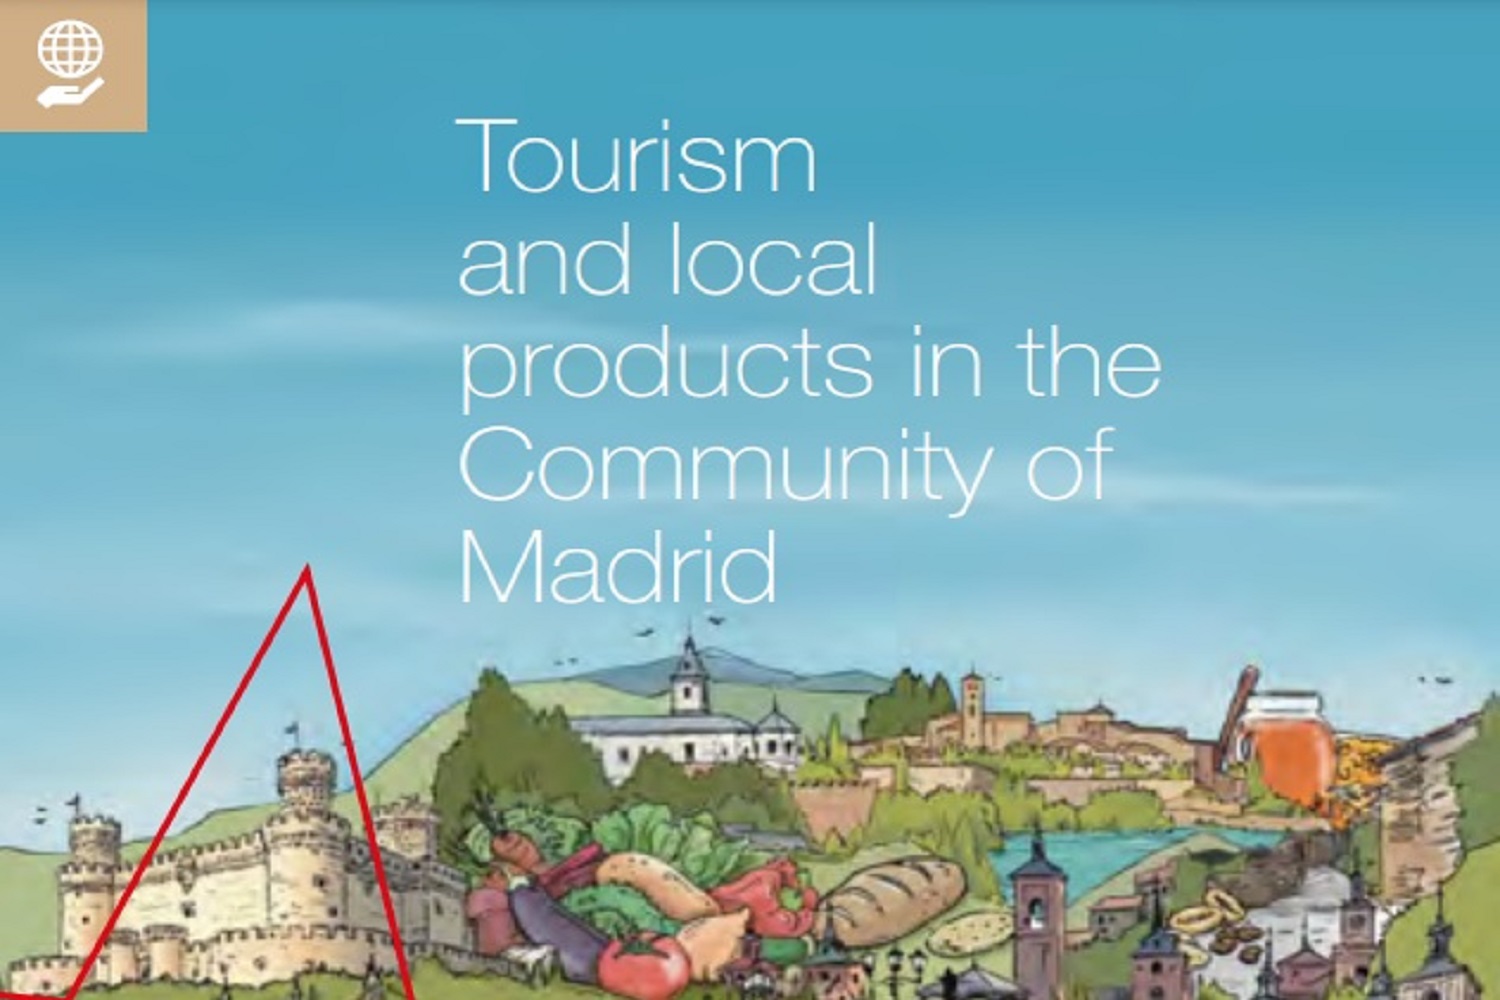 Tourism and local products in the Community of Madrid